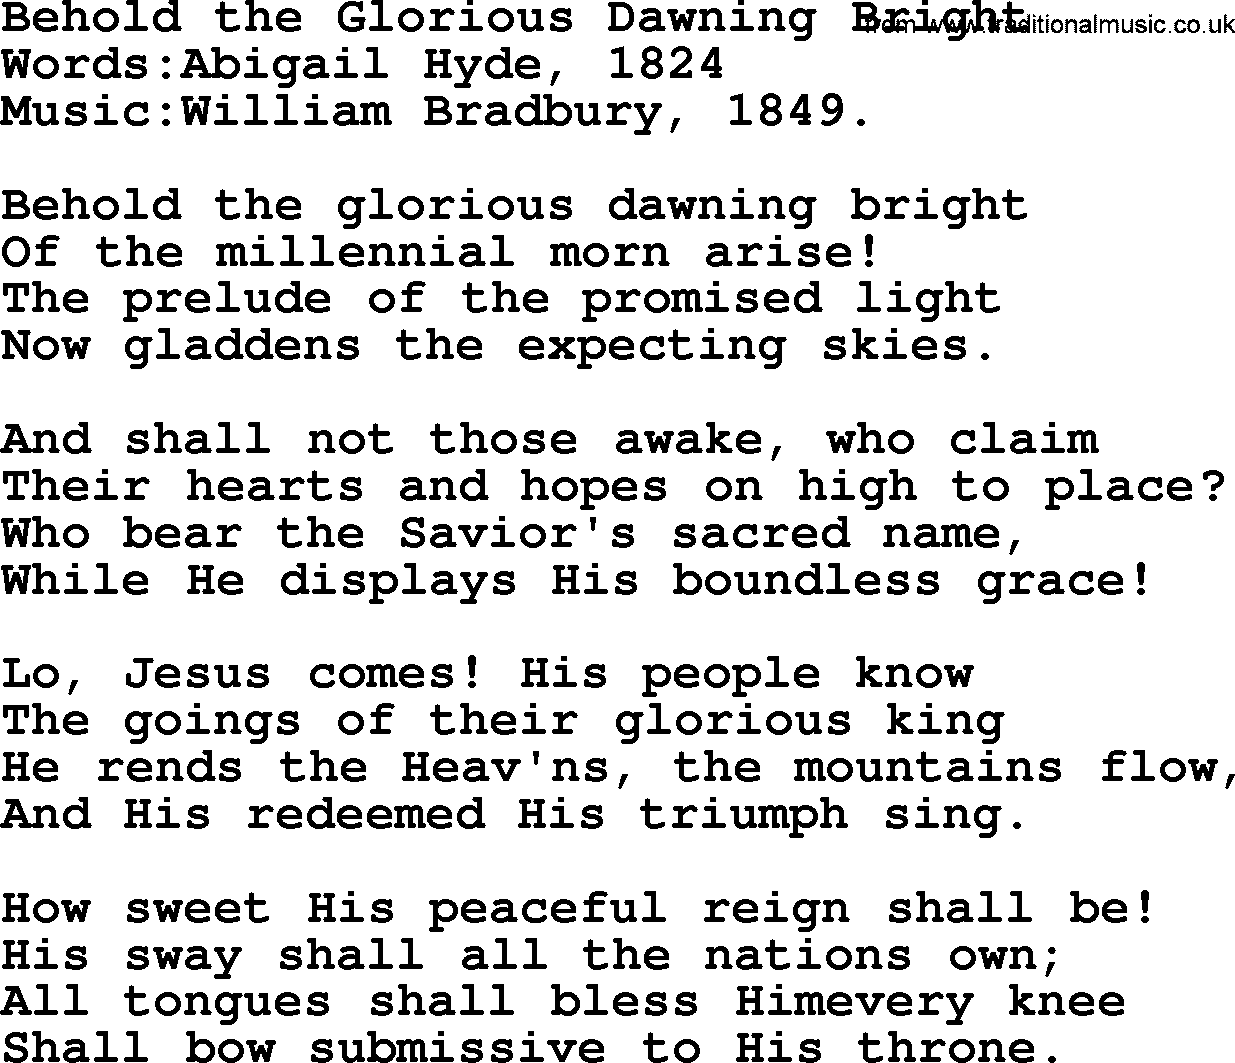 Christian hymns and songs about Jesus' Return(The Second Coming): Behold The Glorious Dawning Bright, lyrics with PDF